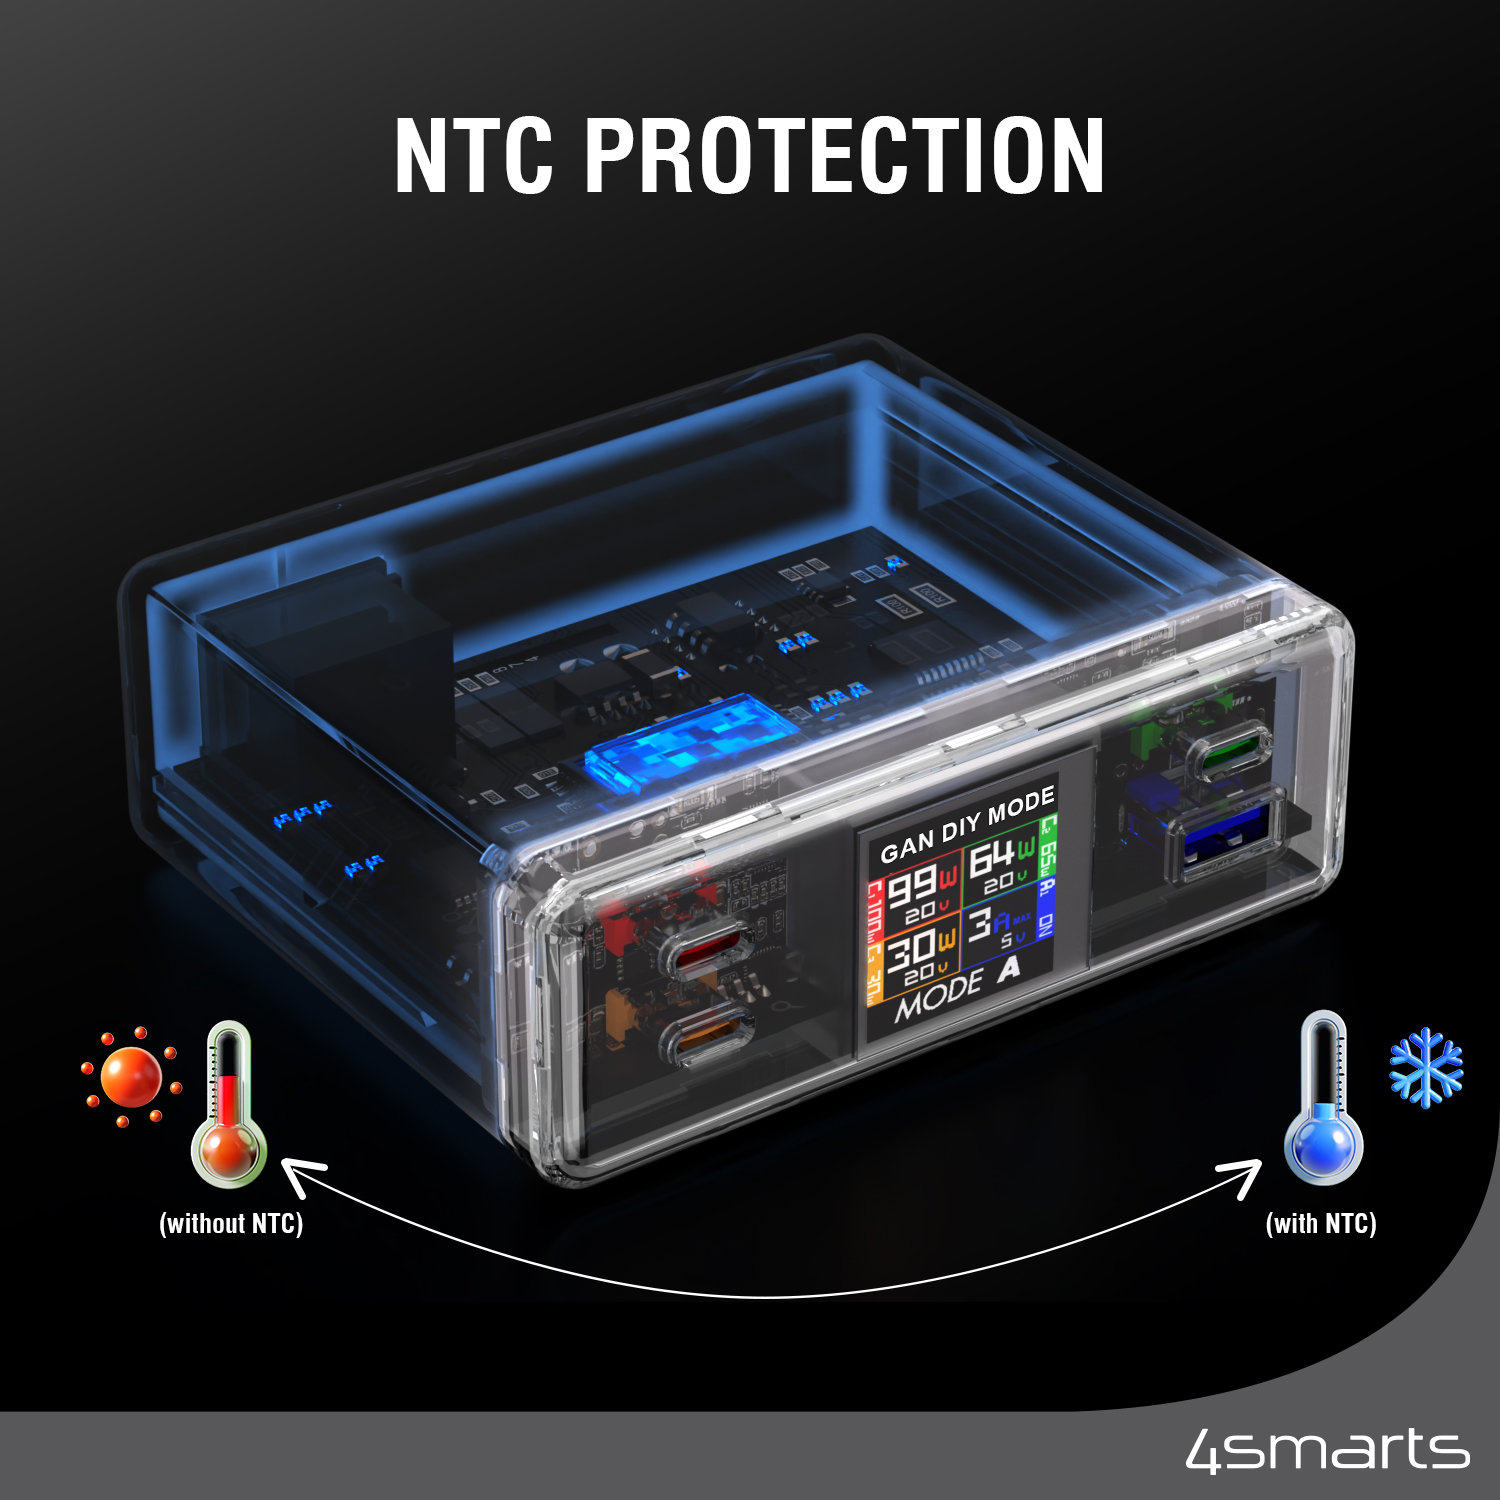 The 4smarts Desk Charger Lucid GaN DIY MODE with 210W is equipped with NTC protection.